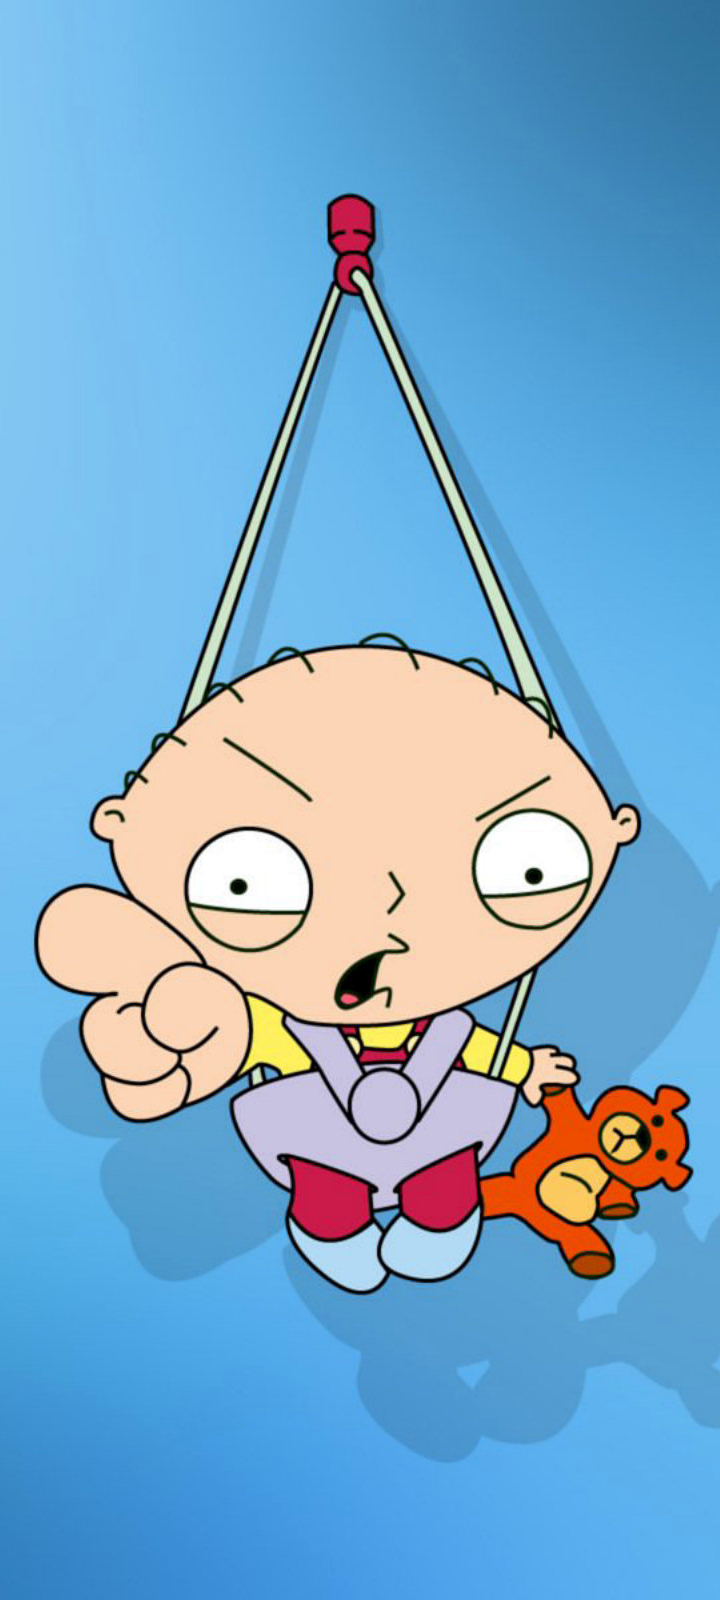 stewie griffin, tv show, family guy cellphone